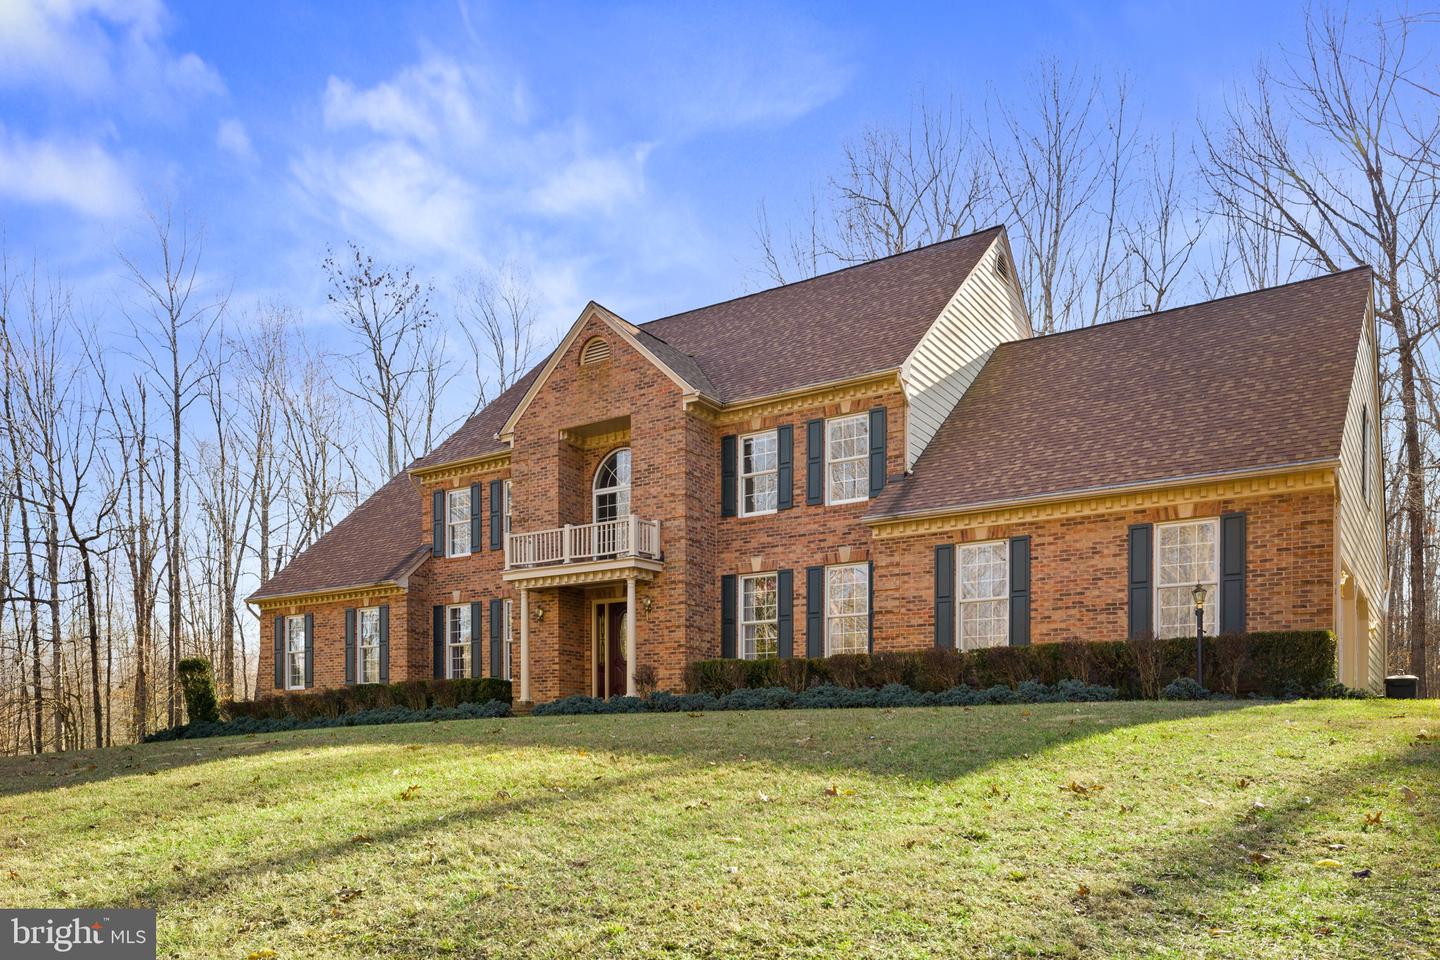 8879 FRENCH FORD DR, NOKESVILLE, Virginia 20181, 5 Bedrooms Bedrooms, 17 Rooms Rooms,4 BathroomsBathrooms,Residential,For sale,8879 FRENCH FORD DR,VAPW2064700 MLS # VAPW2064700